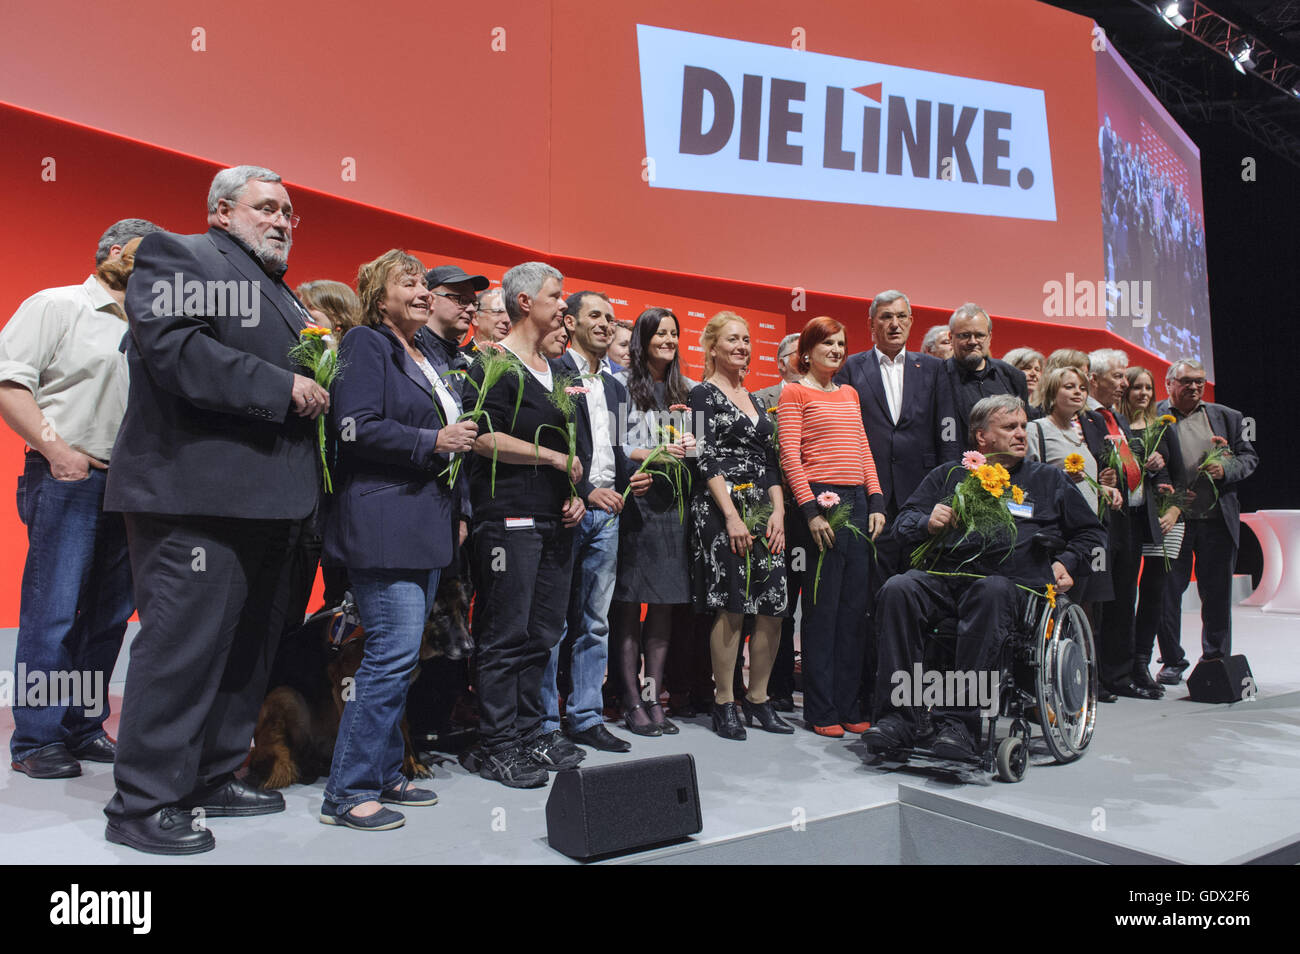 2nd meeting of the 4th Congress Day of the German left-wing-party Die Linke in Berlin, Germany, 2014 Stock Photo